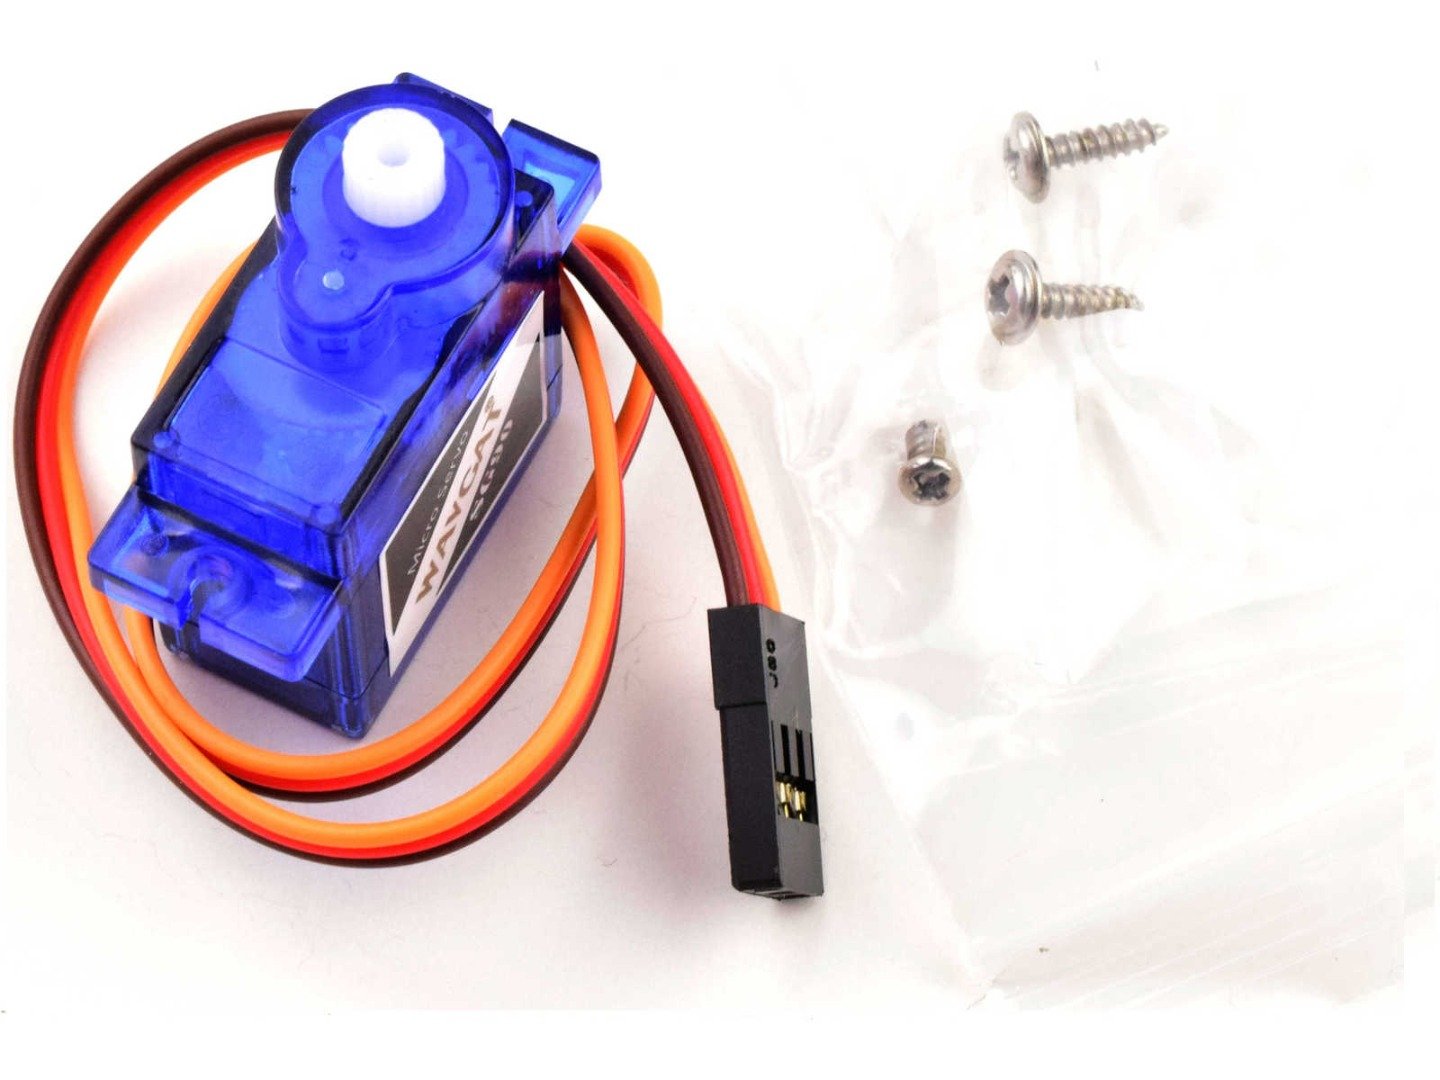 Micro RC Servo SG90 4.8-6V for helicopters cars planes 8